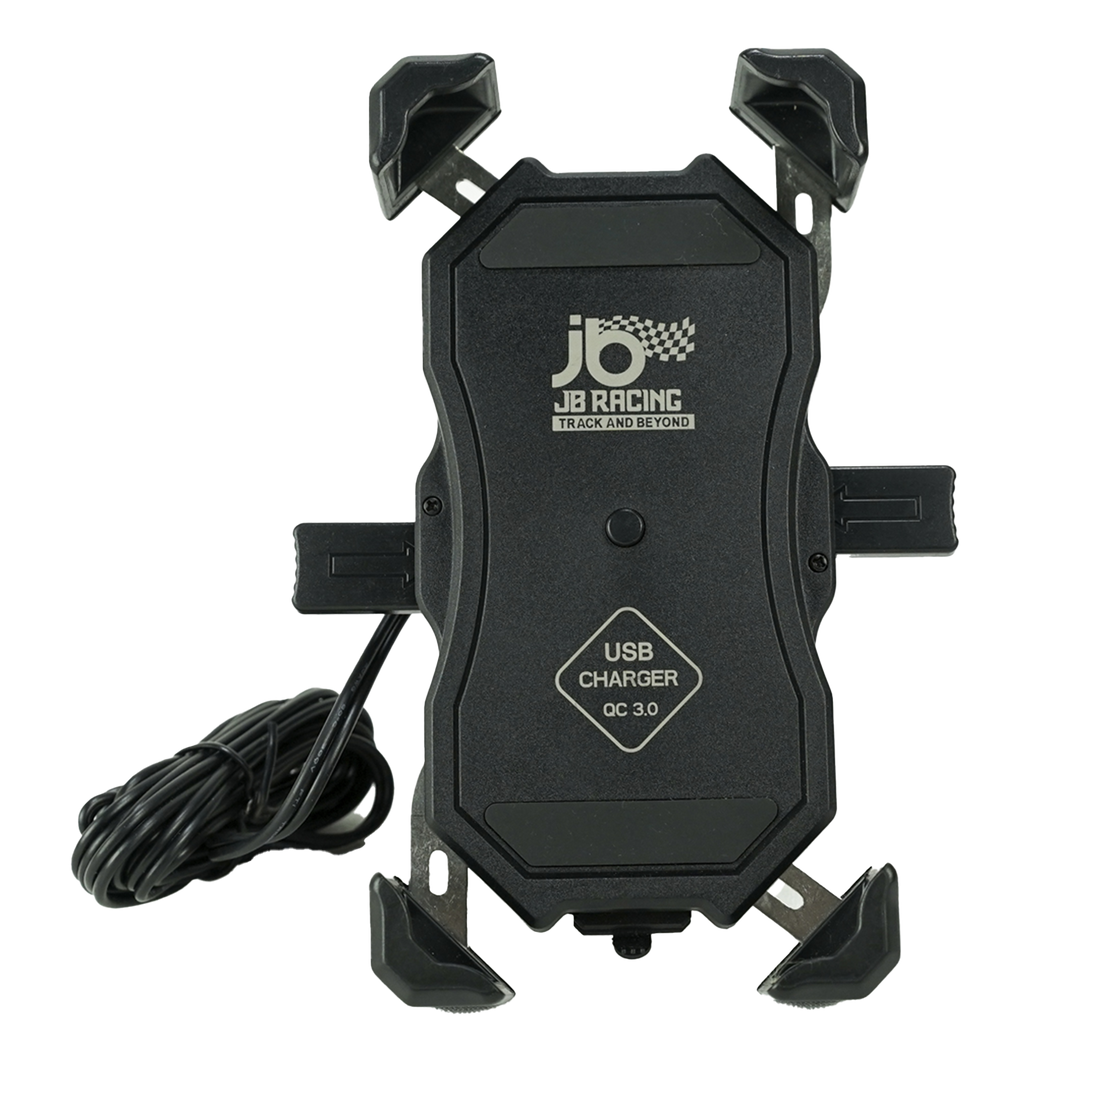 JB Racing Mobile Holder with Charger for Motorcycle